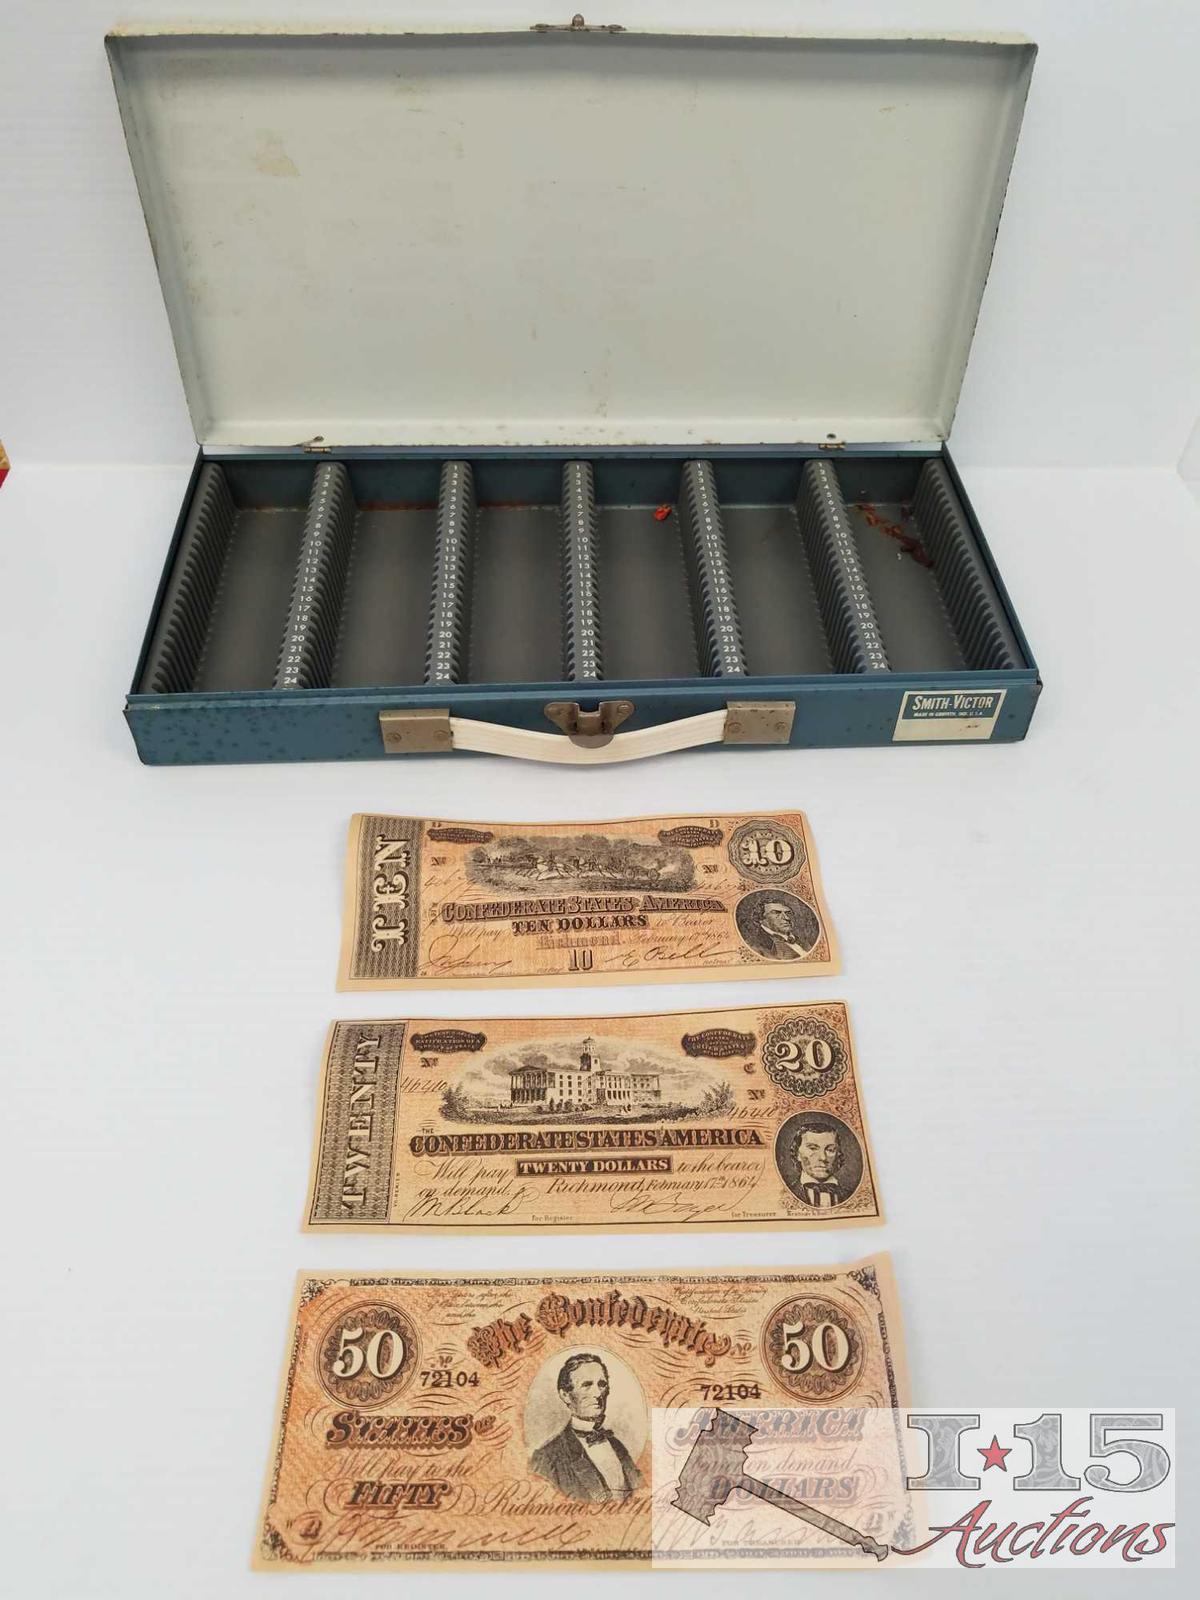 Three Confederate Bill Replicas - $10, $20 and $50 and Vintage Smith-Victor metal coin case